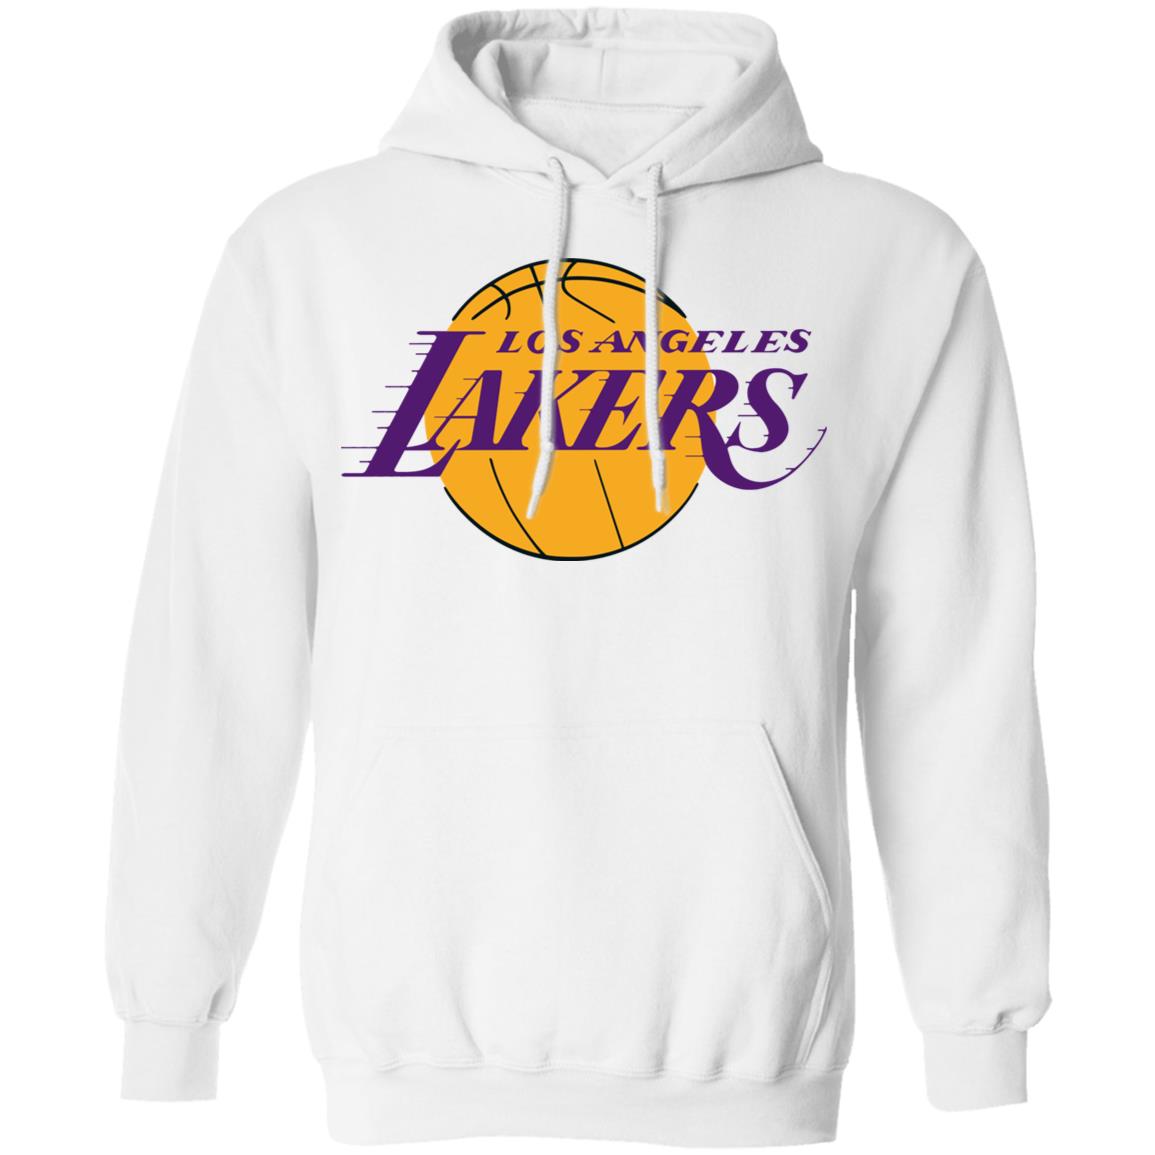 real lakers jersey